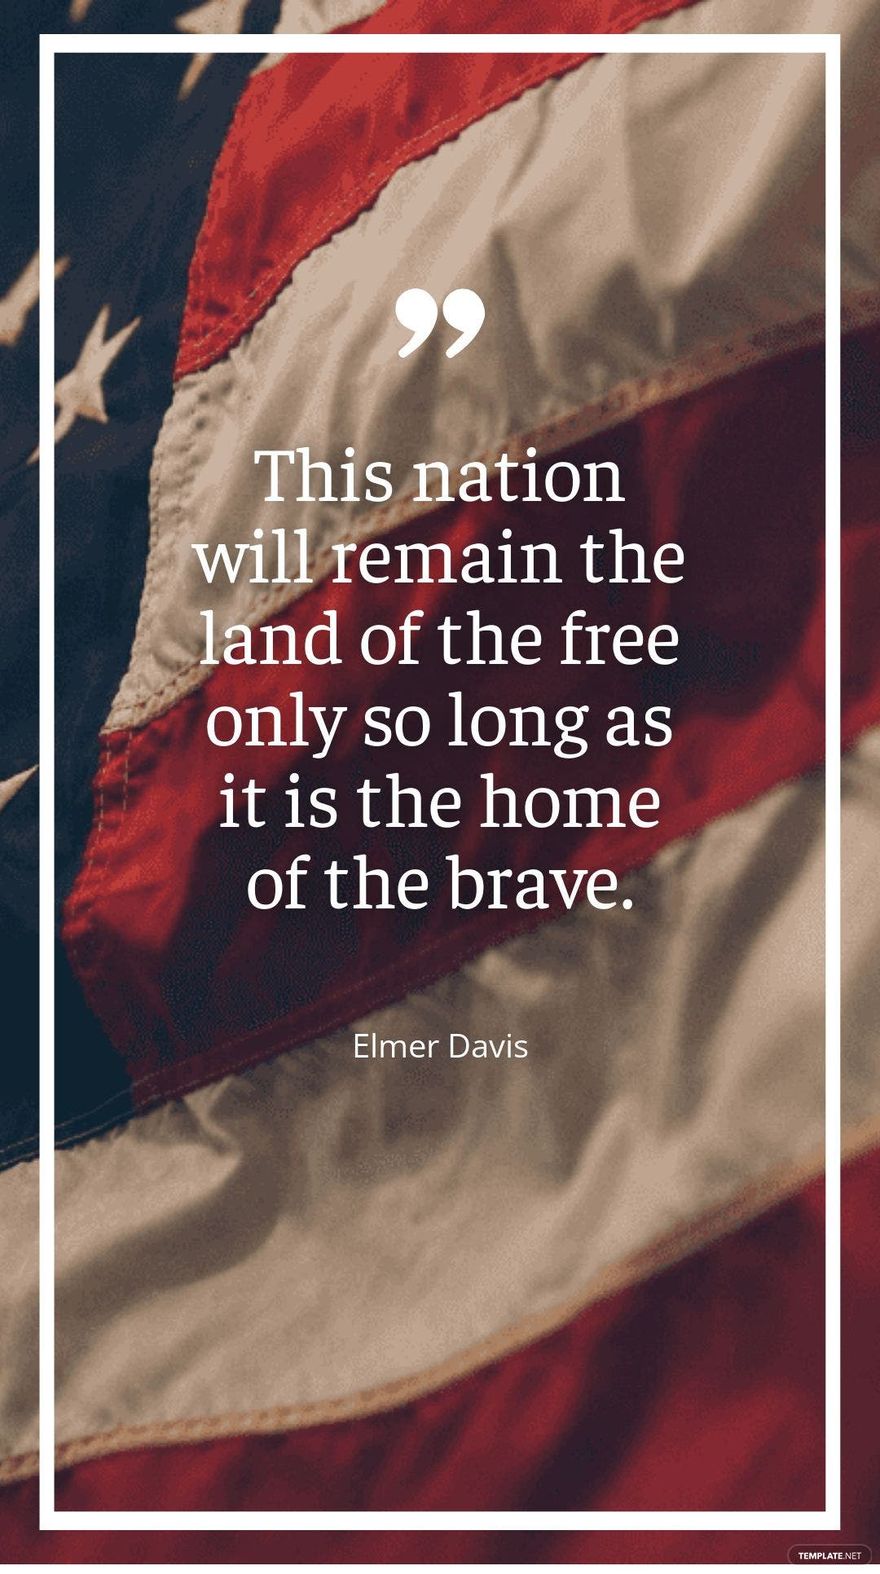 Free Elmer Davis - “This nation will remain the land of the only so long as it is the home of the brave.”